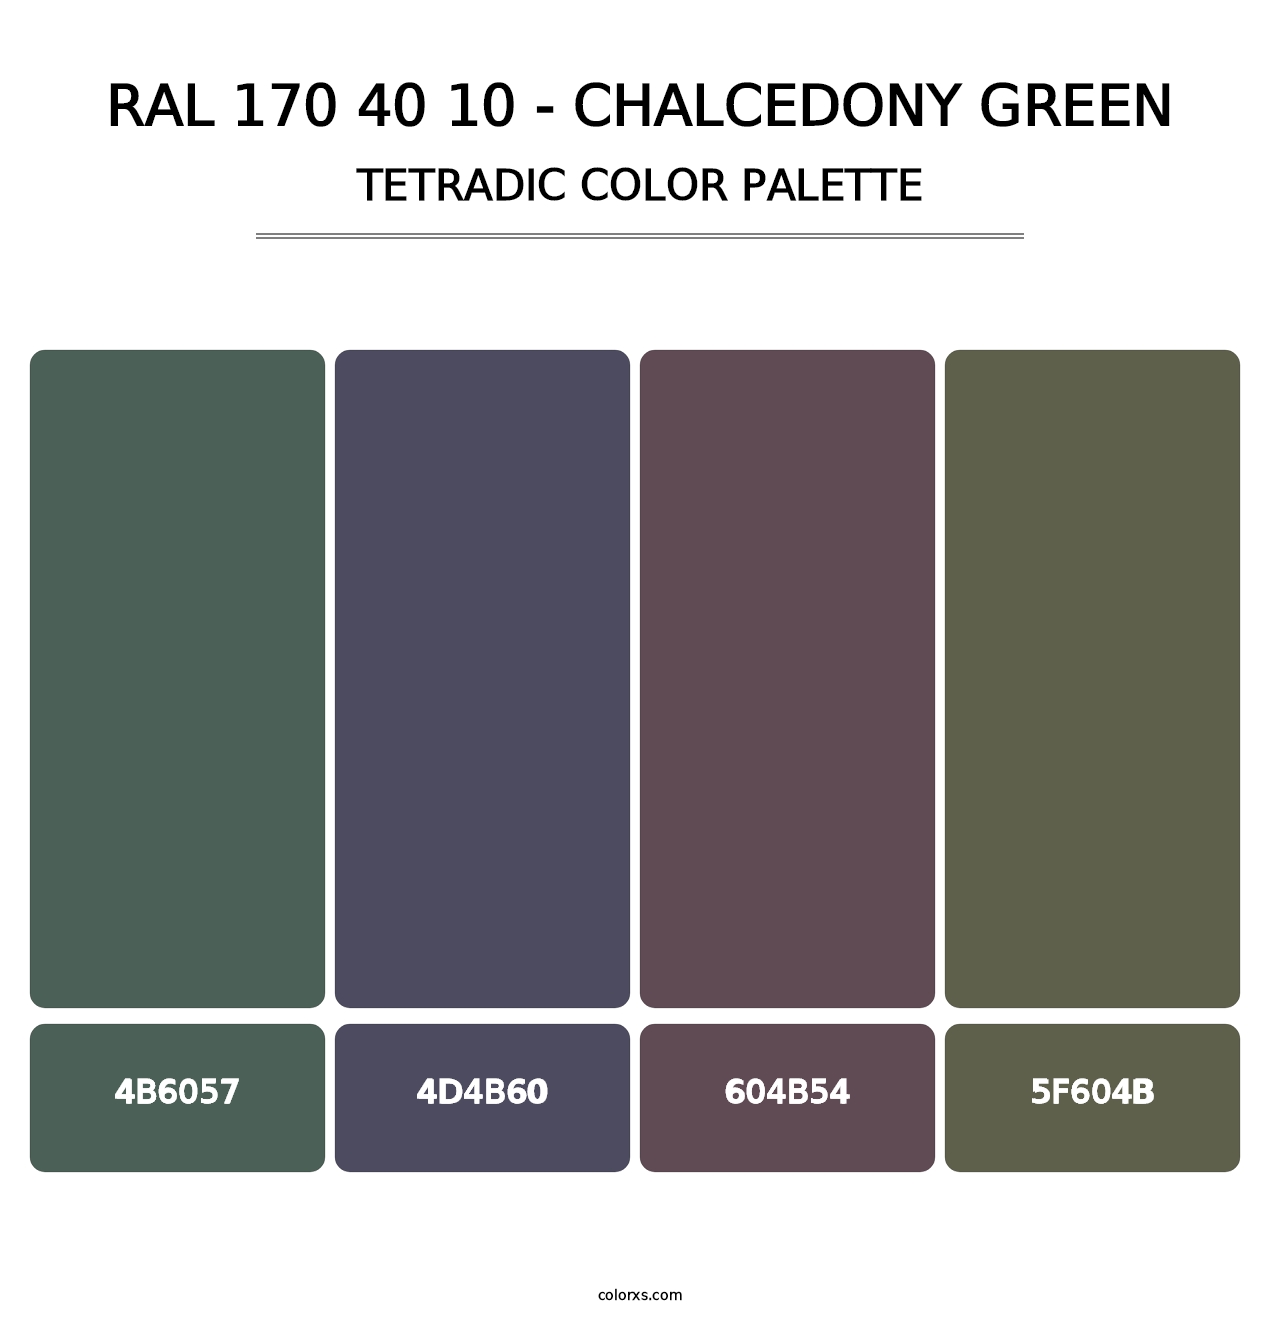 RAL 170 40 10 - Chalcedony Green - Tetradic Color Palette